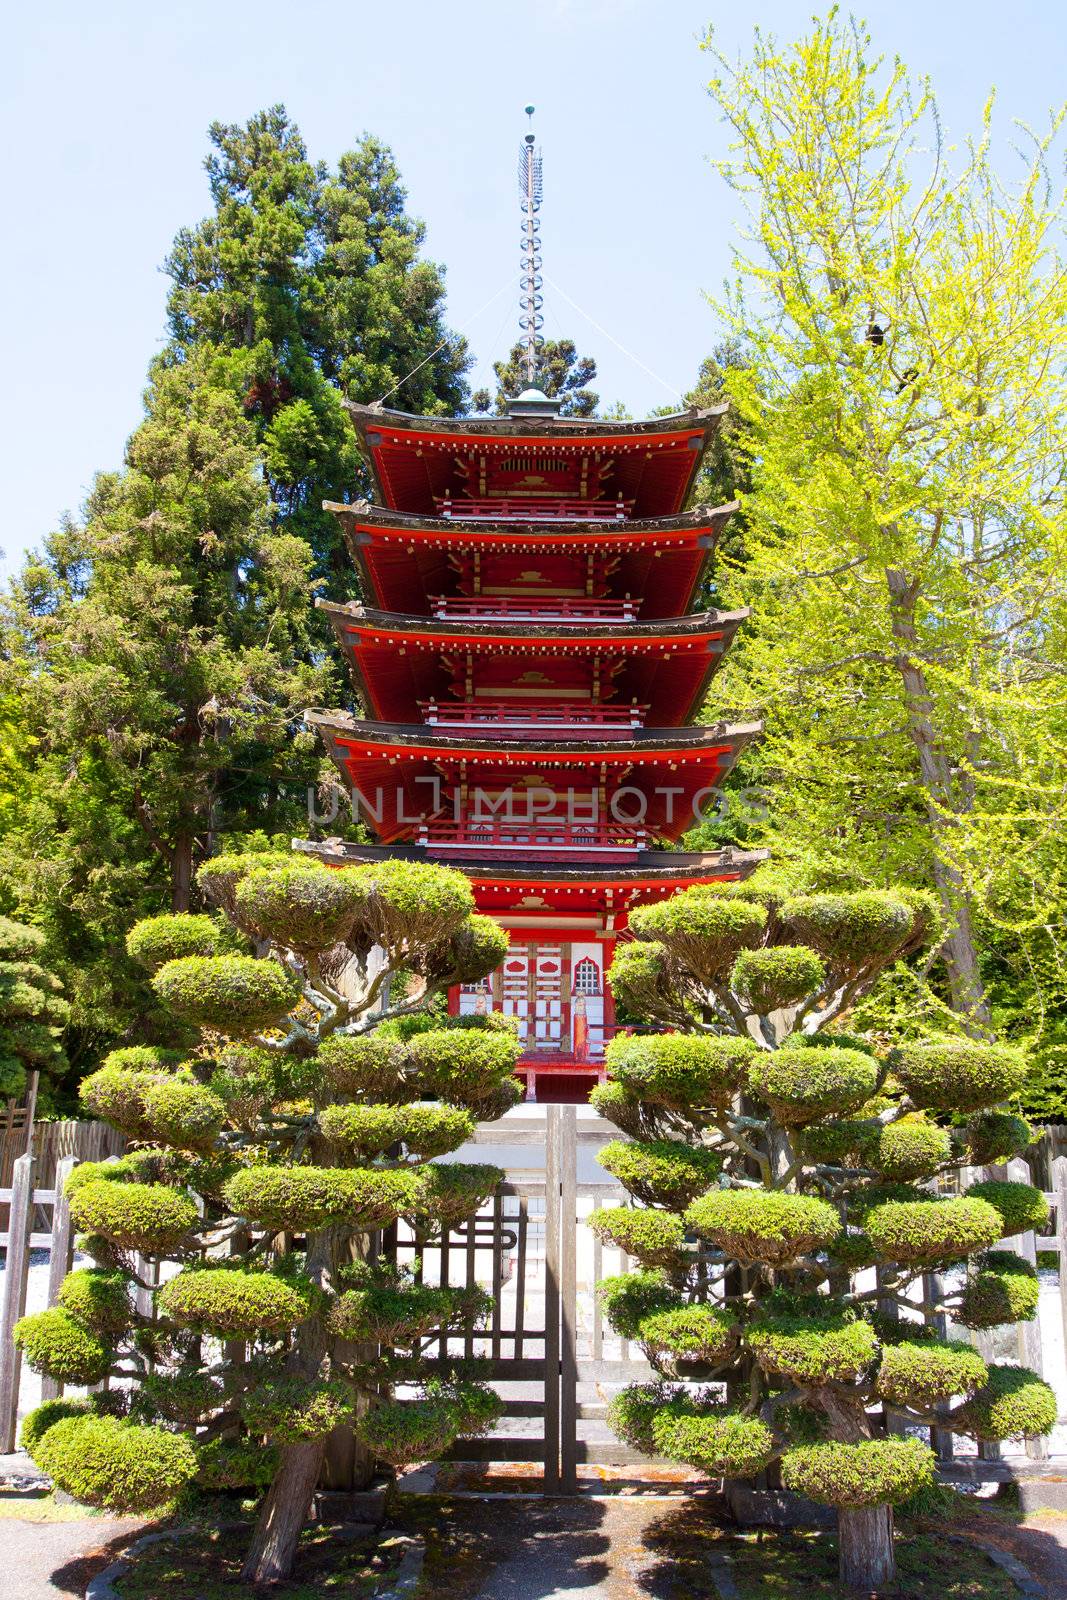 A bright red Japanese pagoda building in a tea garden sits peacefully.